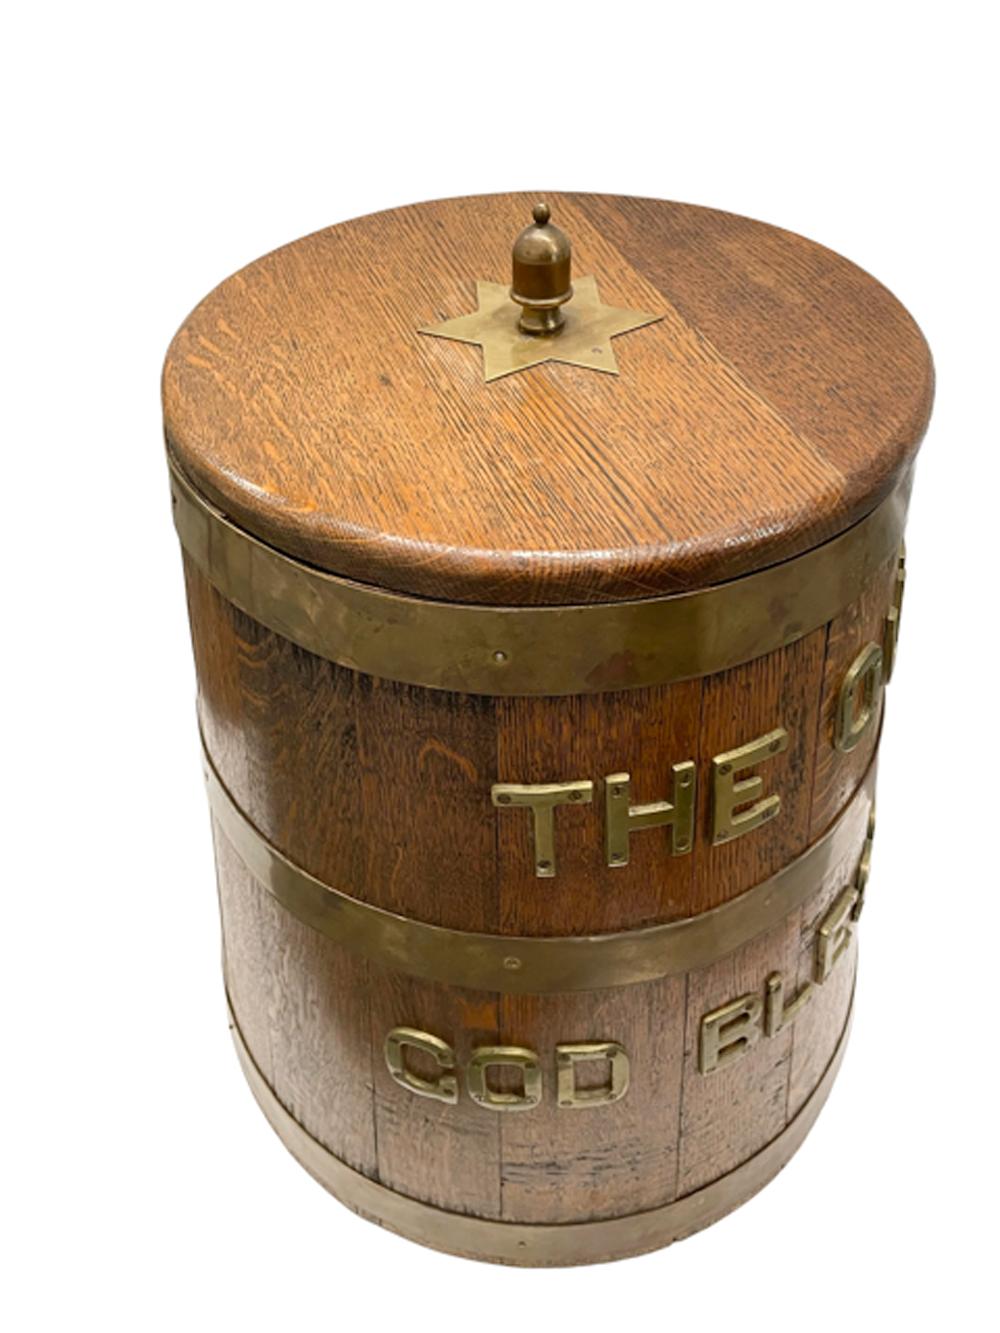 British Naval oak grog barrel or tub, used aboard British ships. The tapered barrel of staved oak with three brass bands. The ‘Royal Toast’, in large brass letters between the bands 